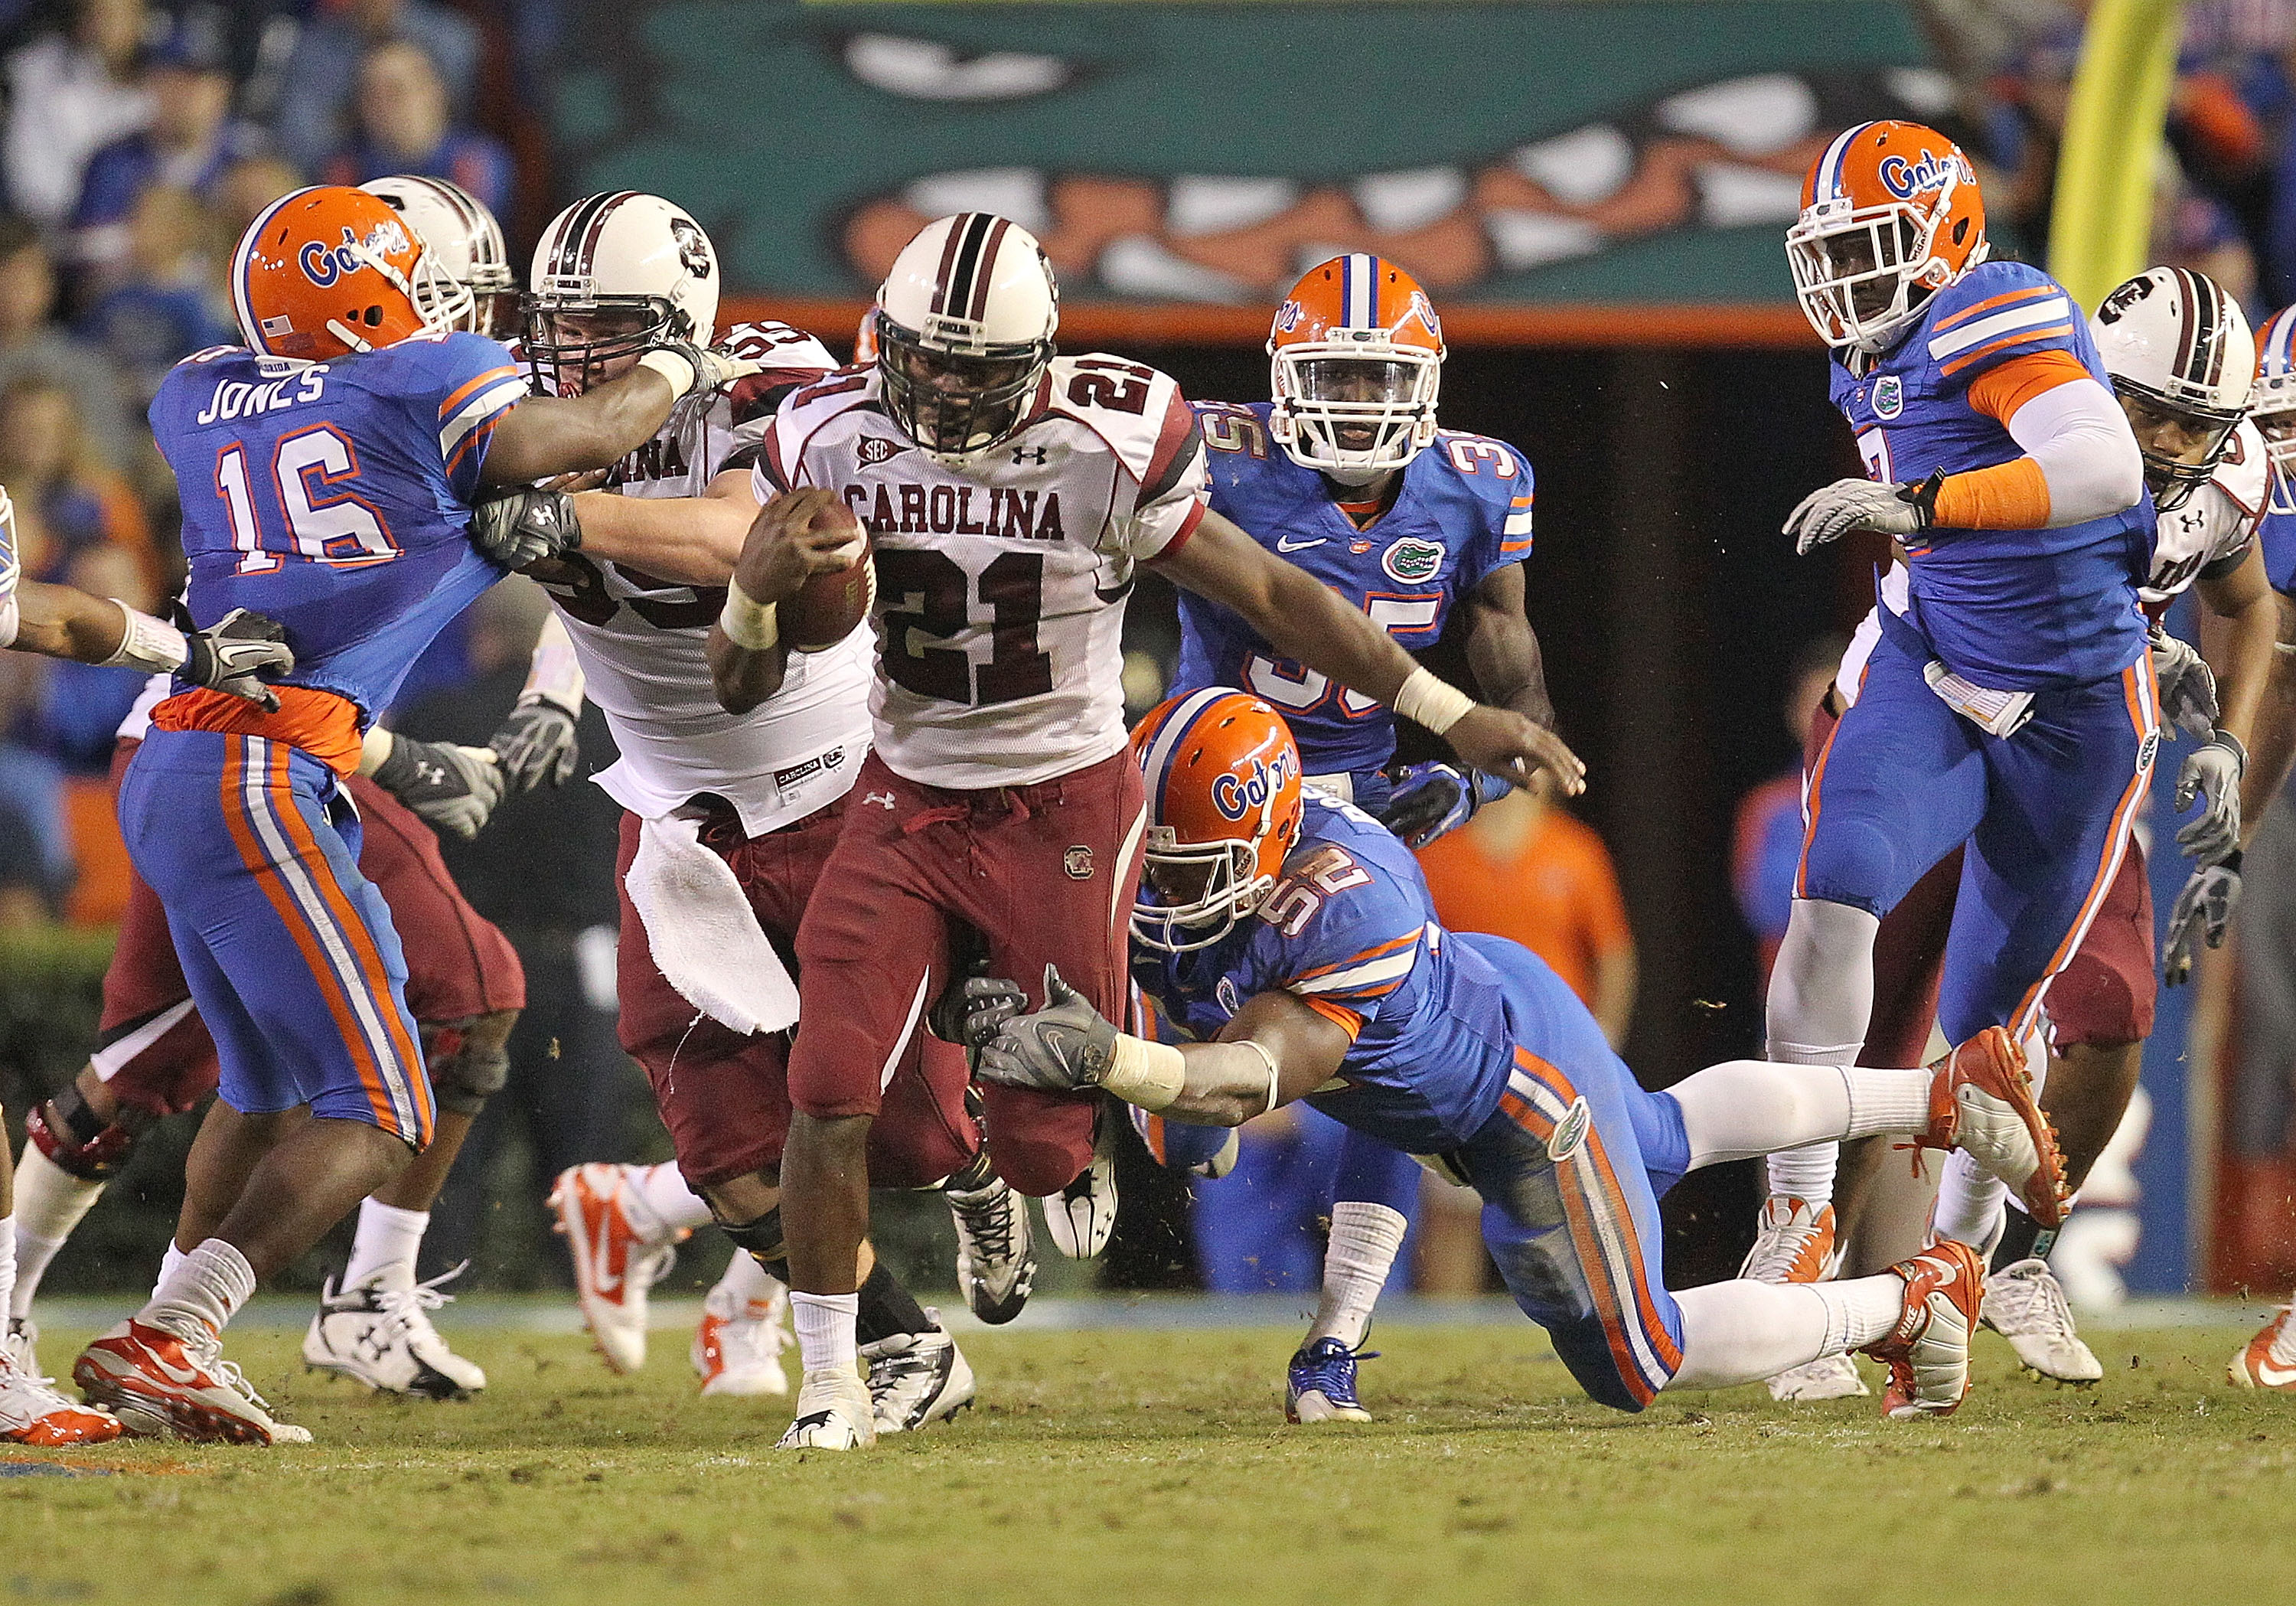 GAINESVILLE, FL - NOVEMBER 13:  Marcus Lattimore #21 of the South Carolina Gamecocks rushes against Jonathan Bostic #52 of the Florida Gators at Ben Hill Griffin Stadium on November 13, 2010 in Gainesville, Florida.  (Photo by Mike Ehrmann/Getty Images)